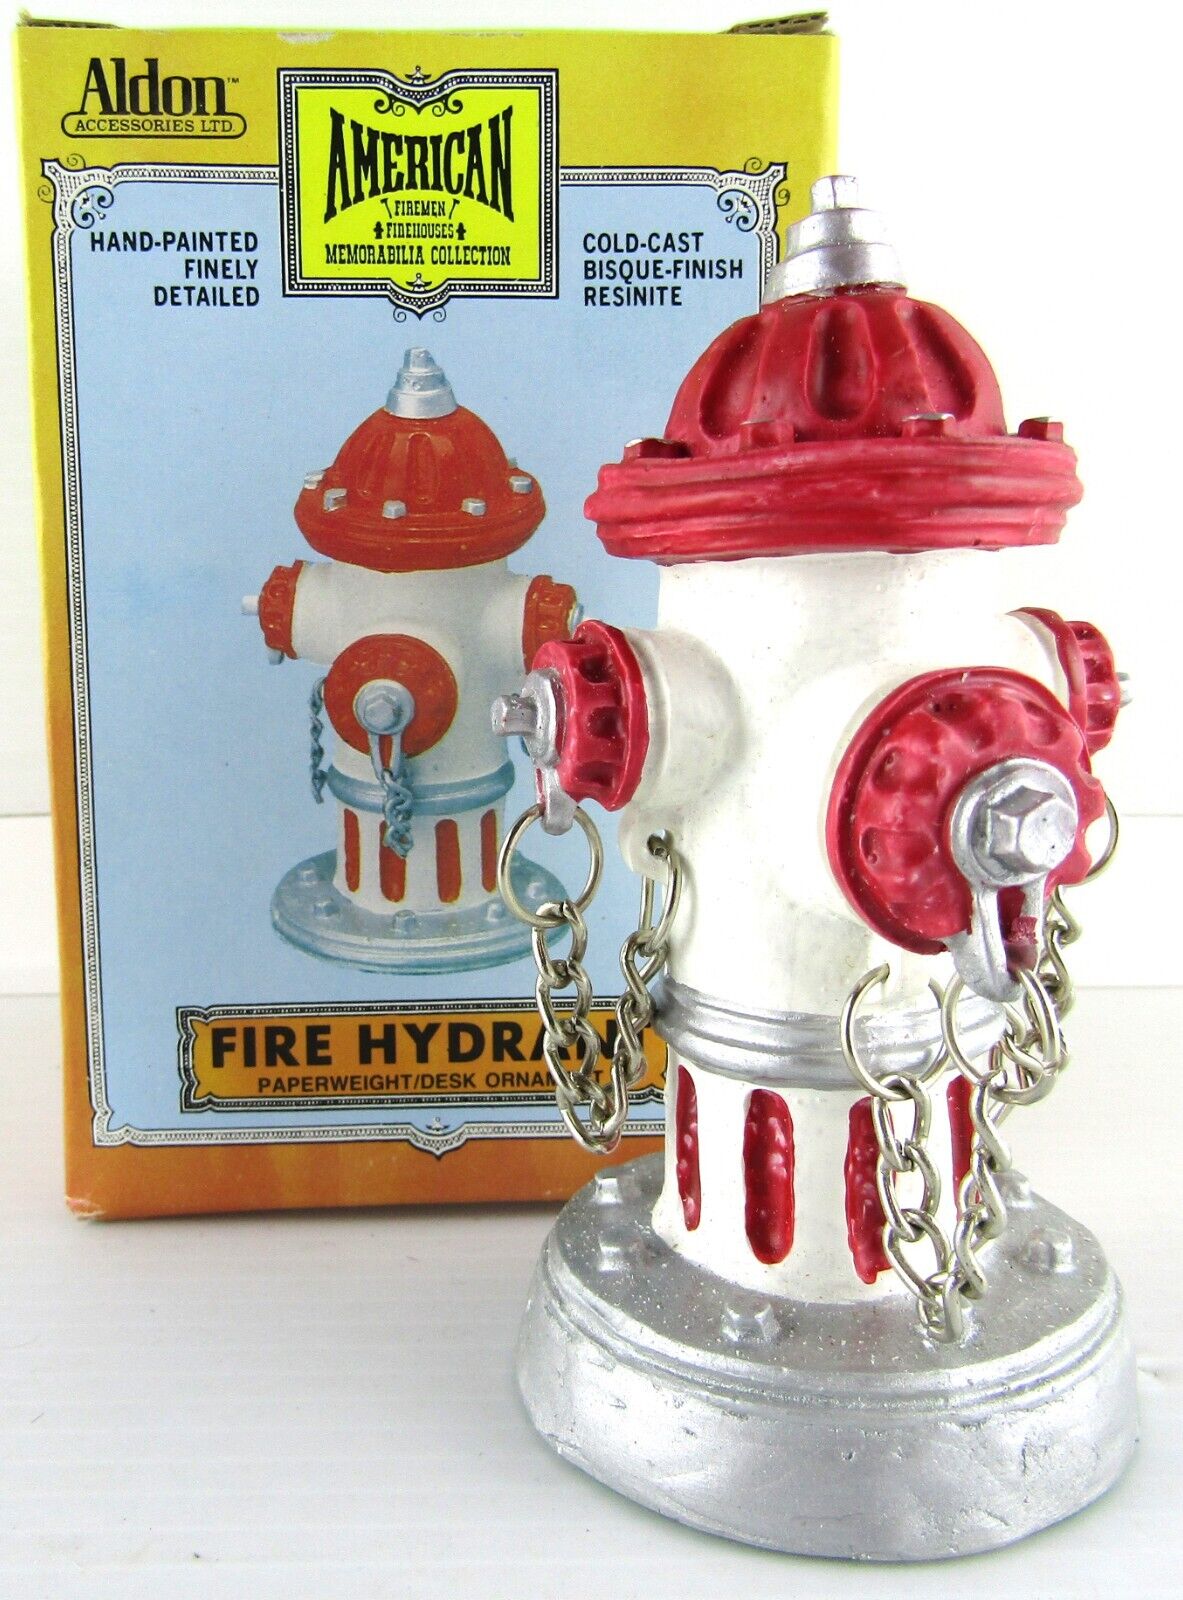 Vintage Aldon Fireman Fire Hydrant Paper Weight Desk Firehouse Collection 1988